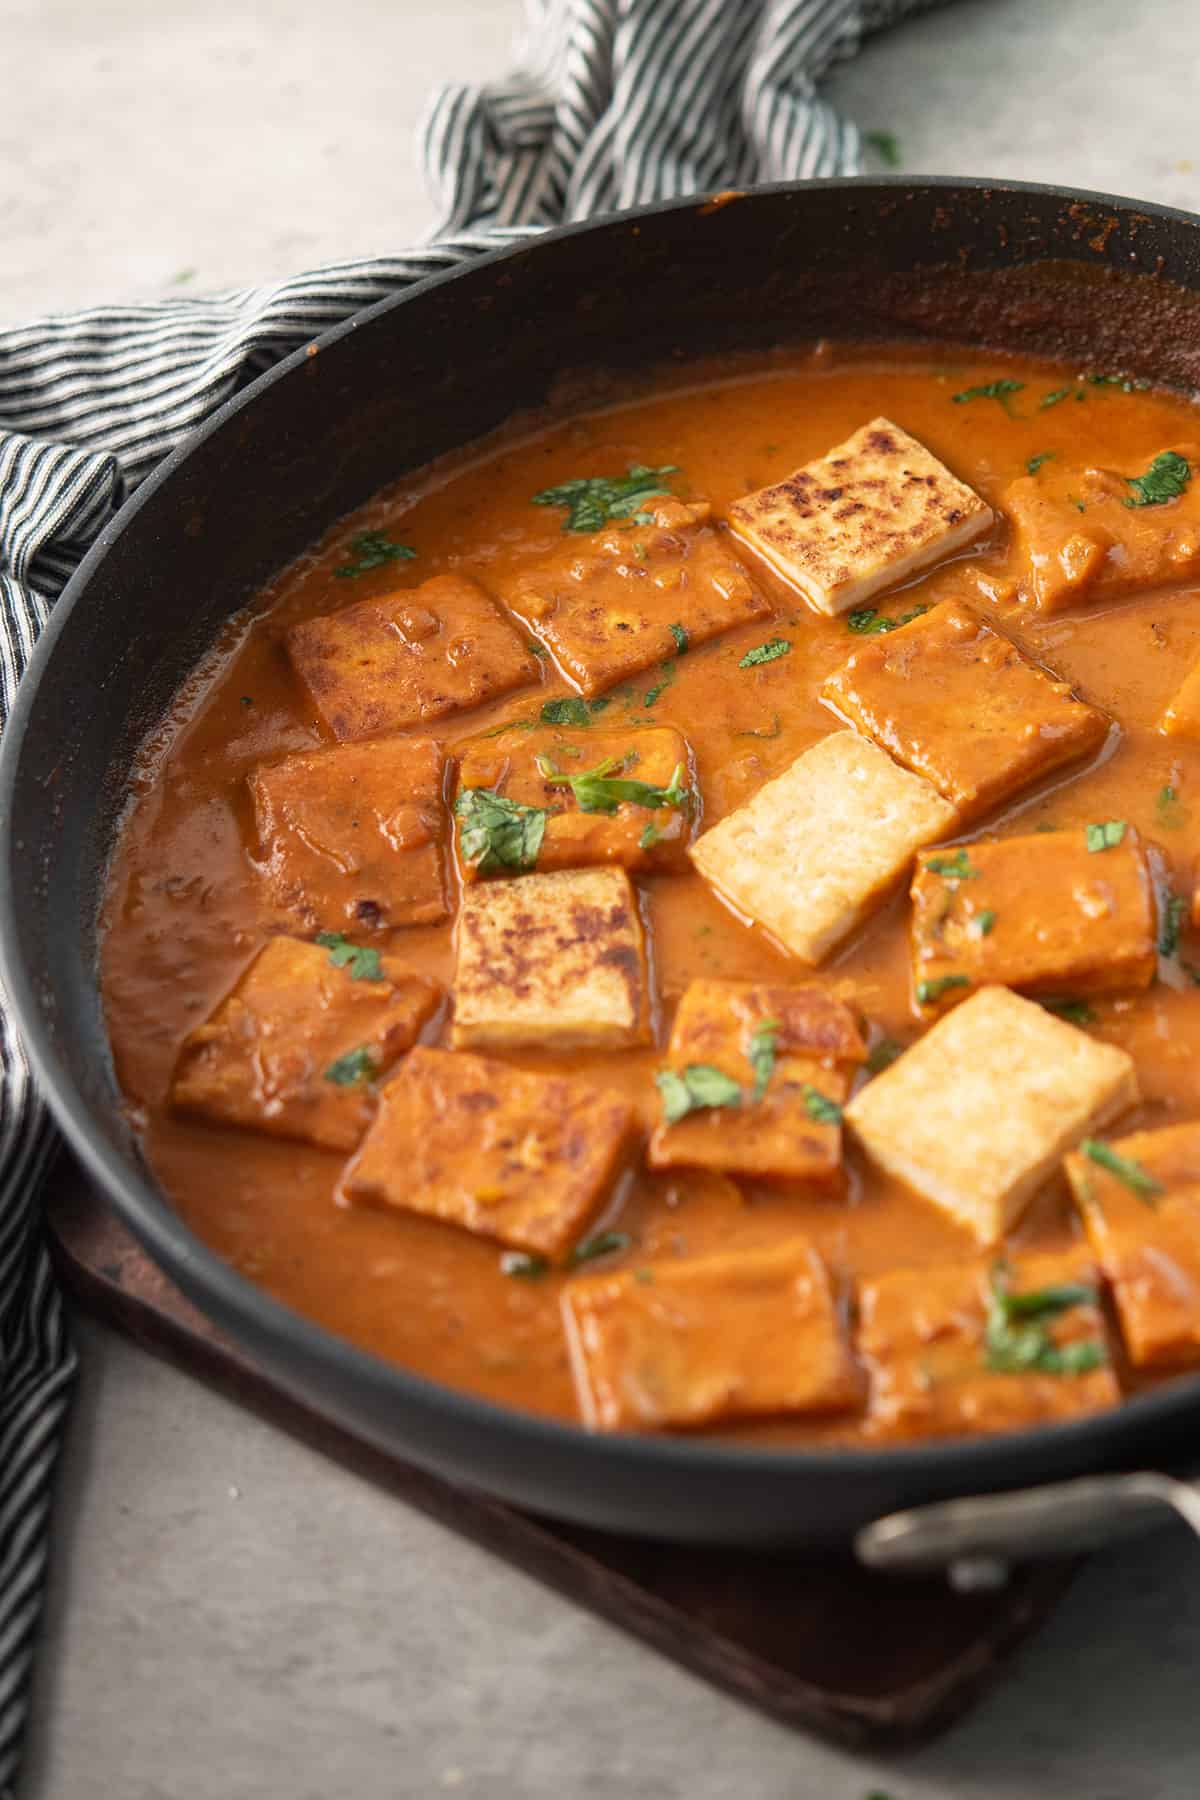 Tofu in the pan red curry sauce